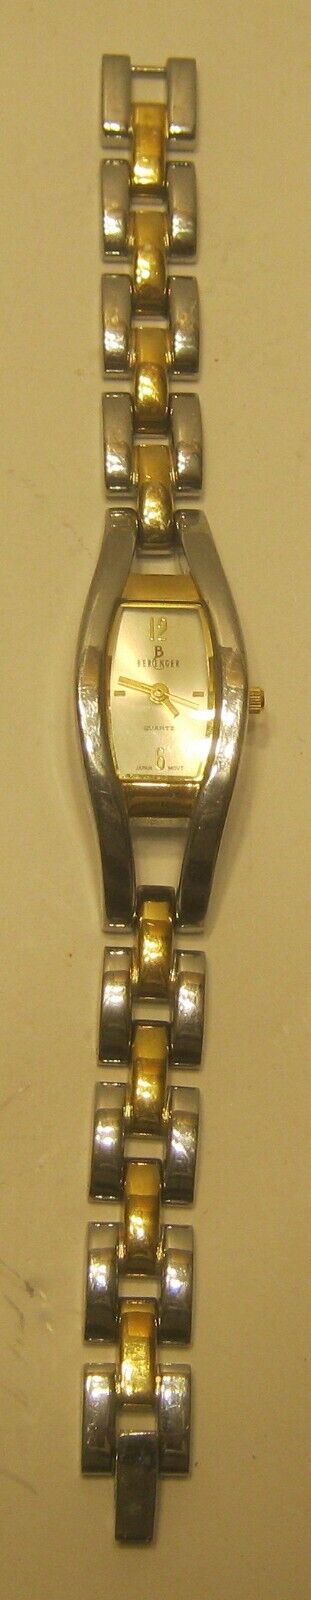 Elegant BERENGER Ladies Watch IP GOLD on Solid Brass Case NEW BATTERY!!!!